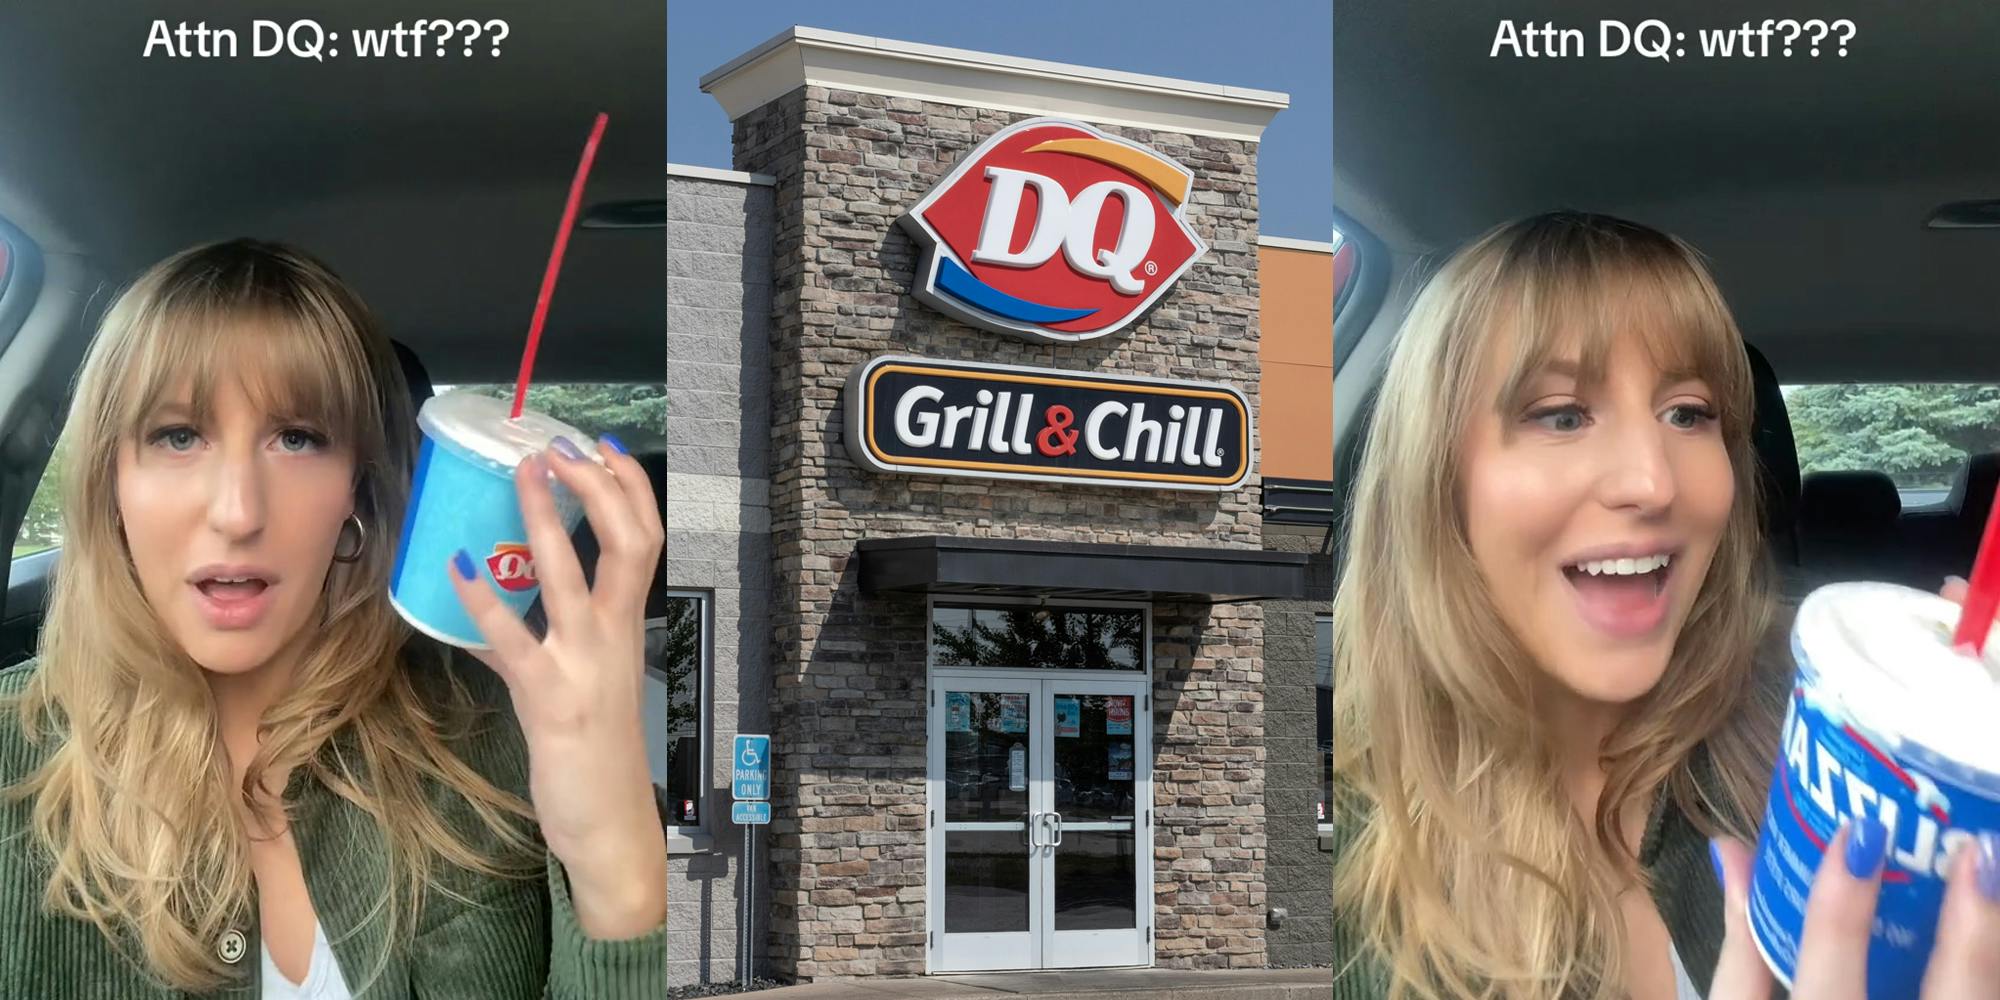 DQ customer speaking in car holding small Blizzard with caption "Attn DQ: wtf???" (l) Dairy Queen building with sign (c) DQ customer speaking in car holding small Blizzard with caption "Attn DQ: wtf???" (r)